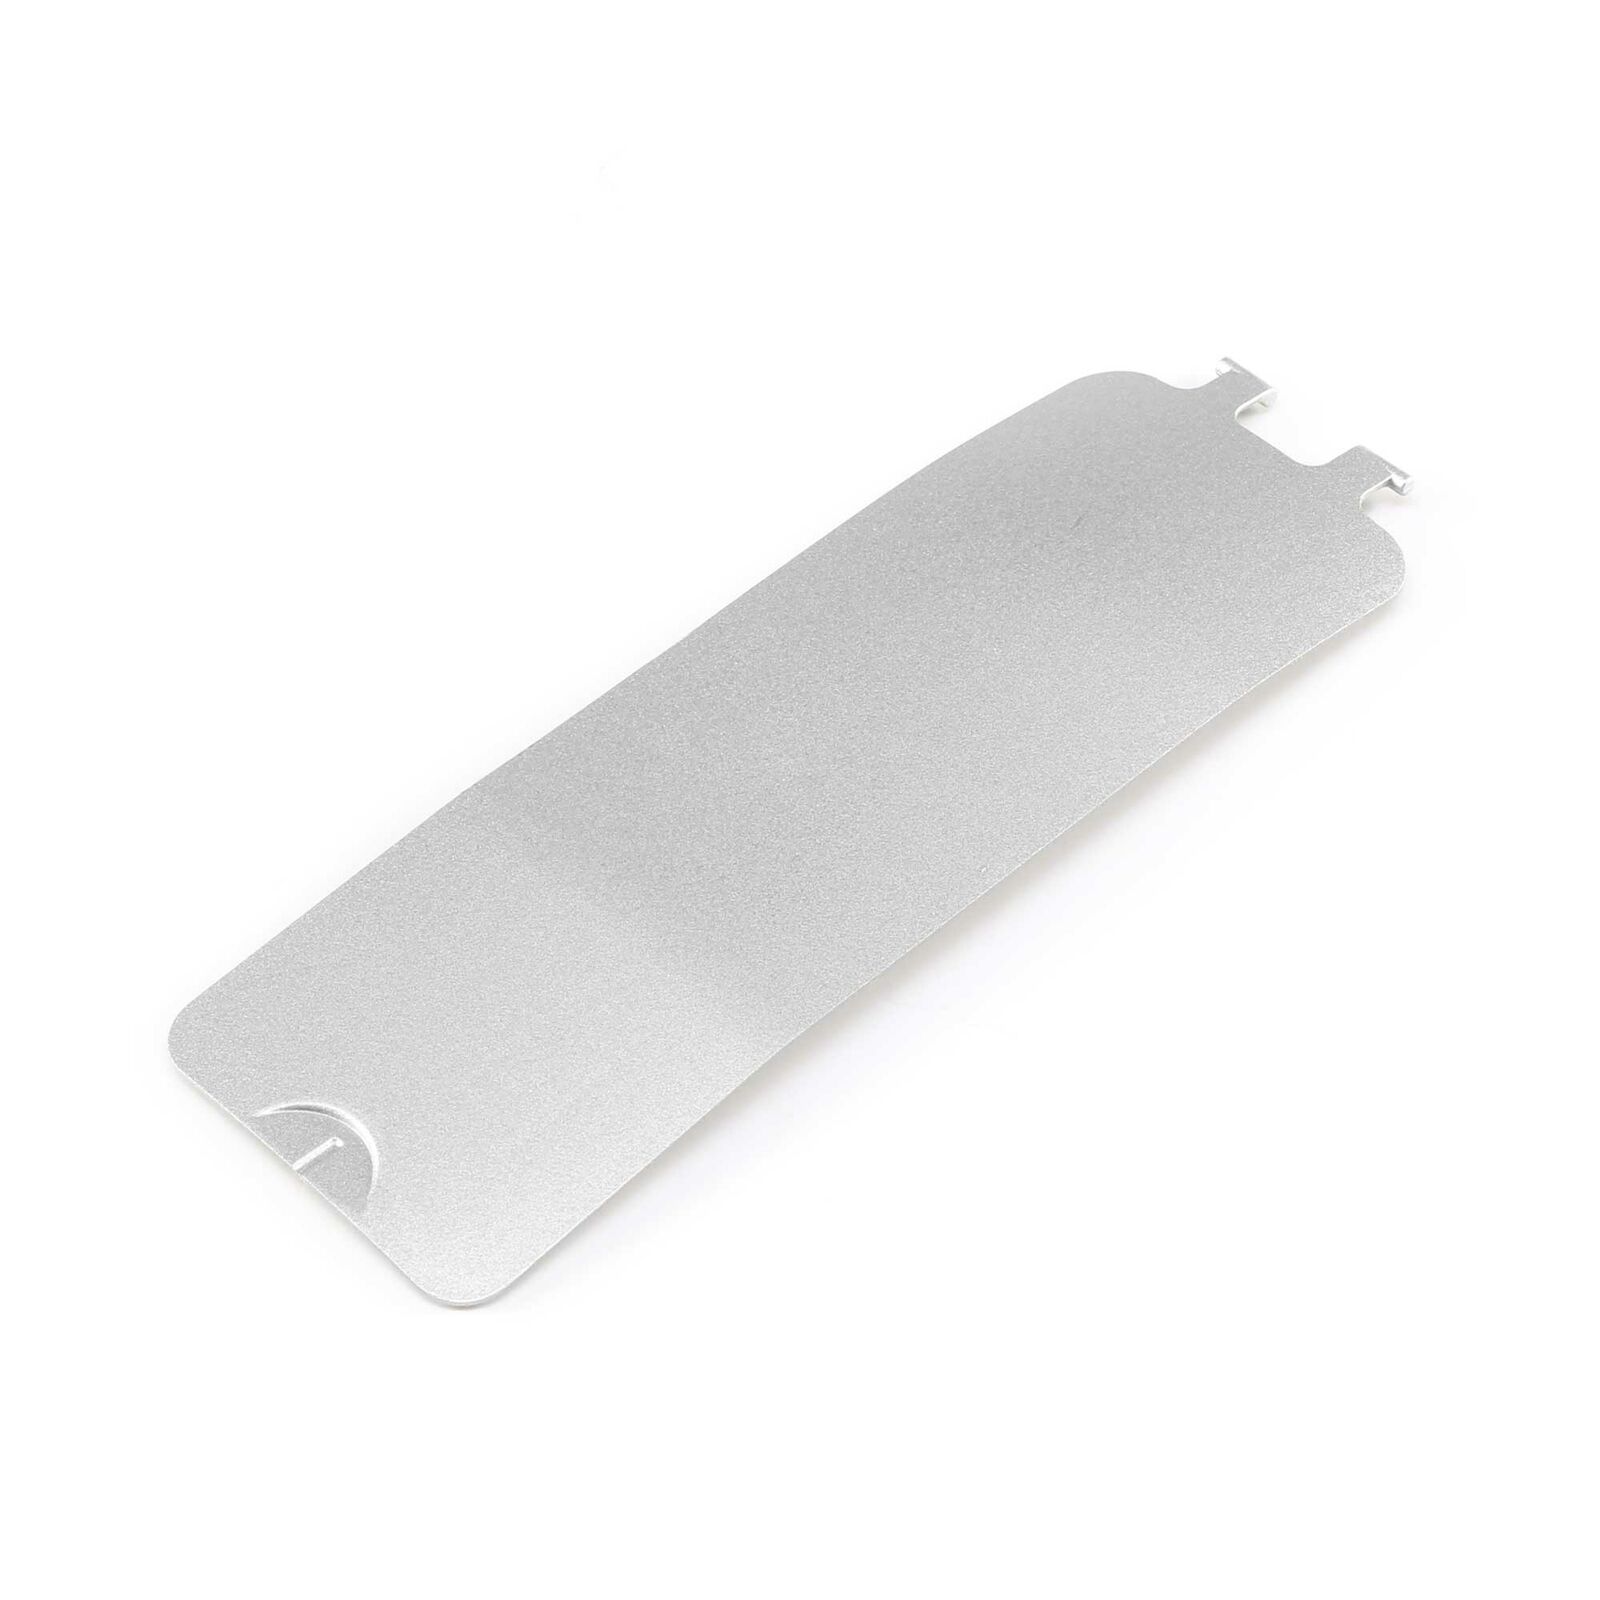 HobbyZone Battery Hatch Carbon Cub S+ 1.3m HBZ3228 Replacement Airplane Parts